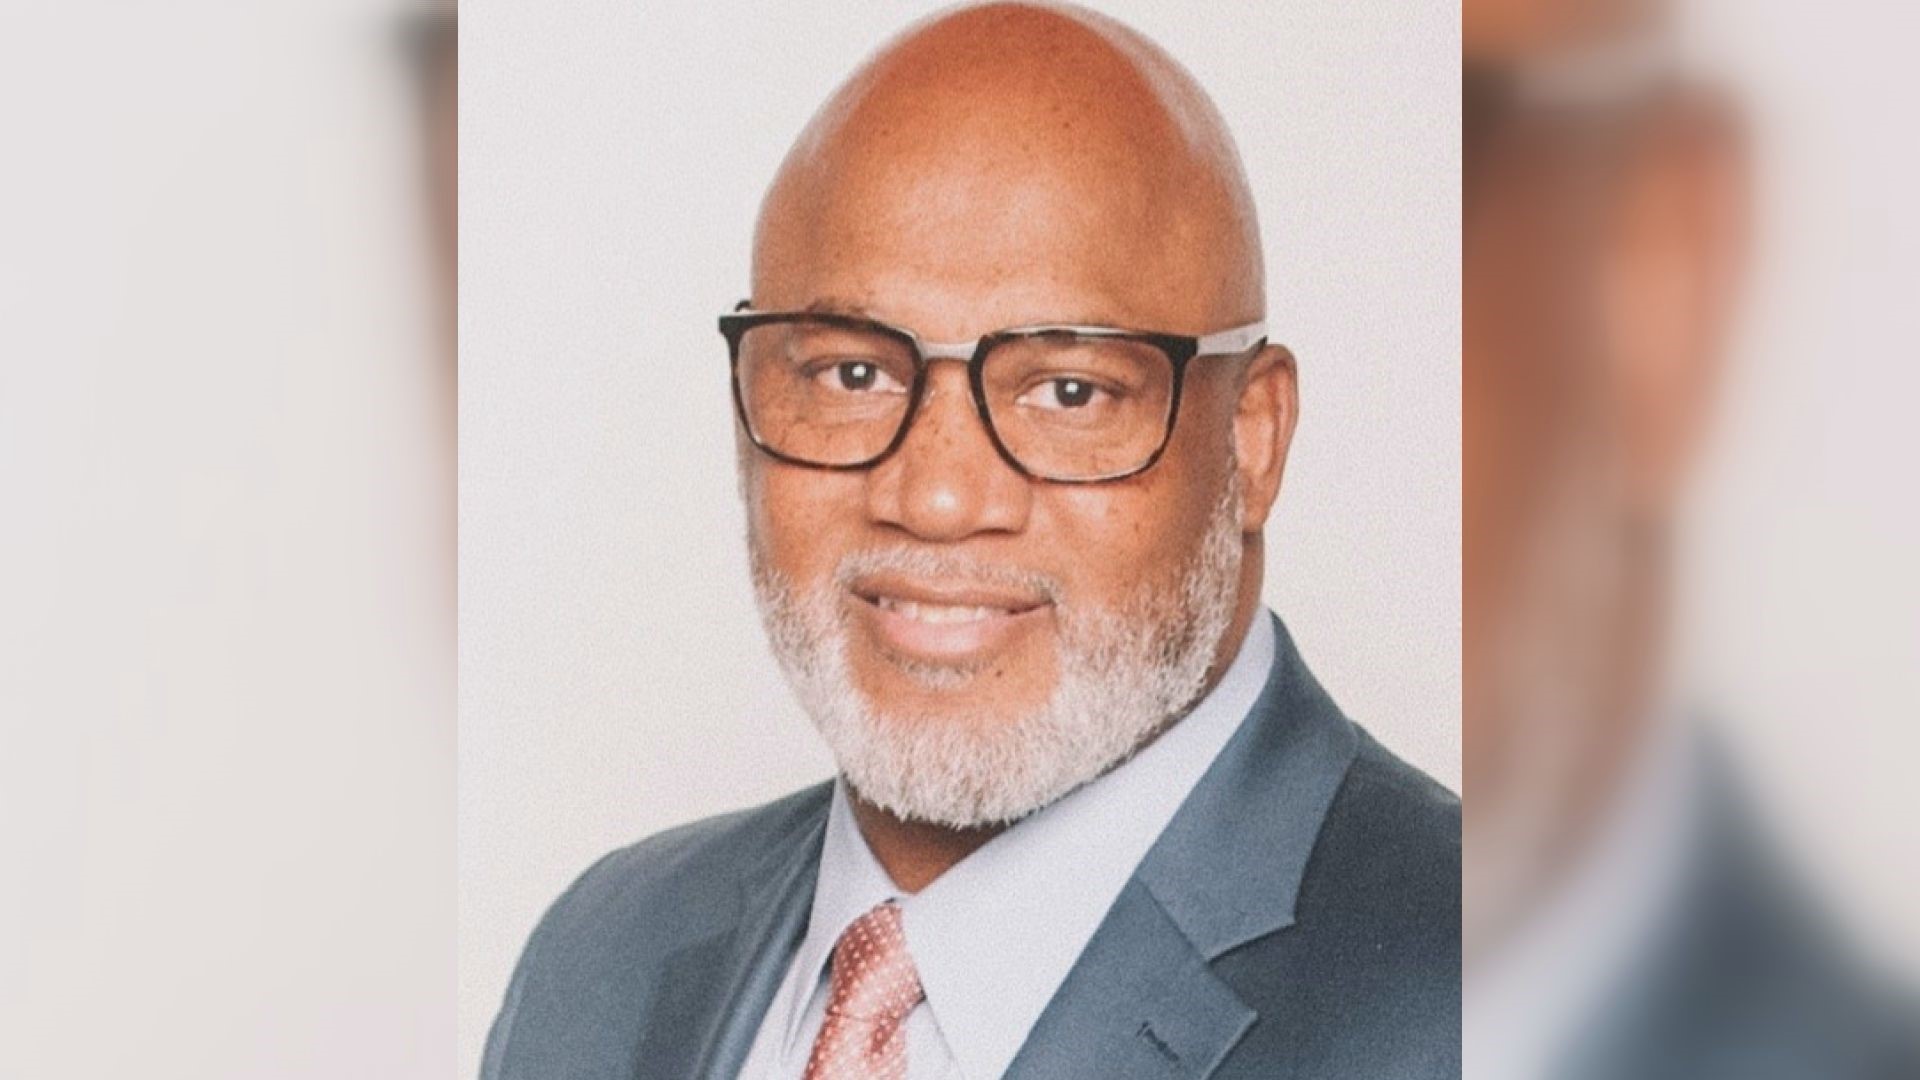 After six years of working hand-in-hand with Superintendent Curtis Jones, Simmons will go on to lead the Griffin-Spalding County School District